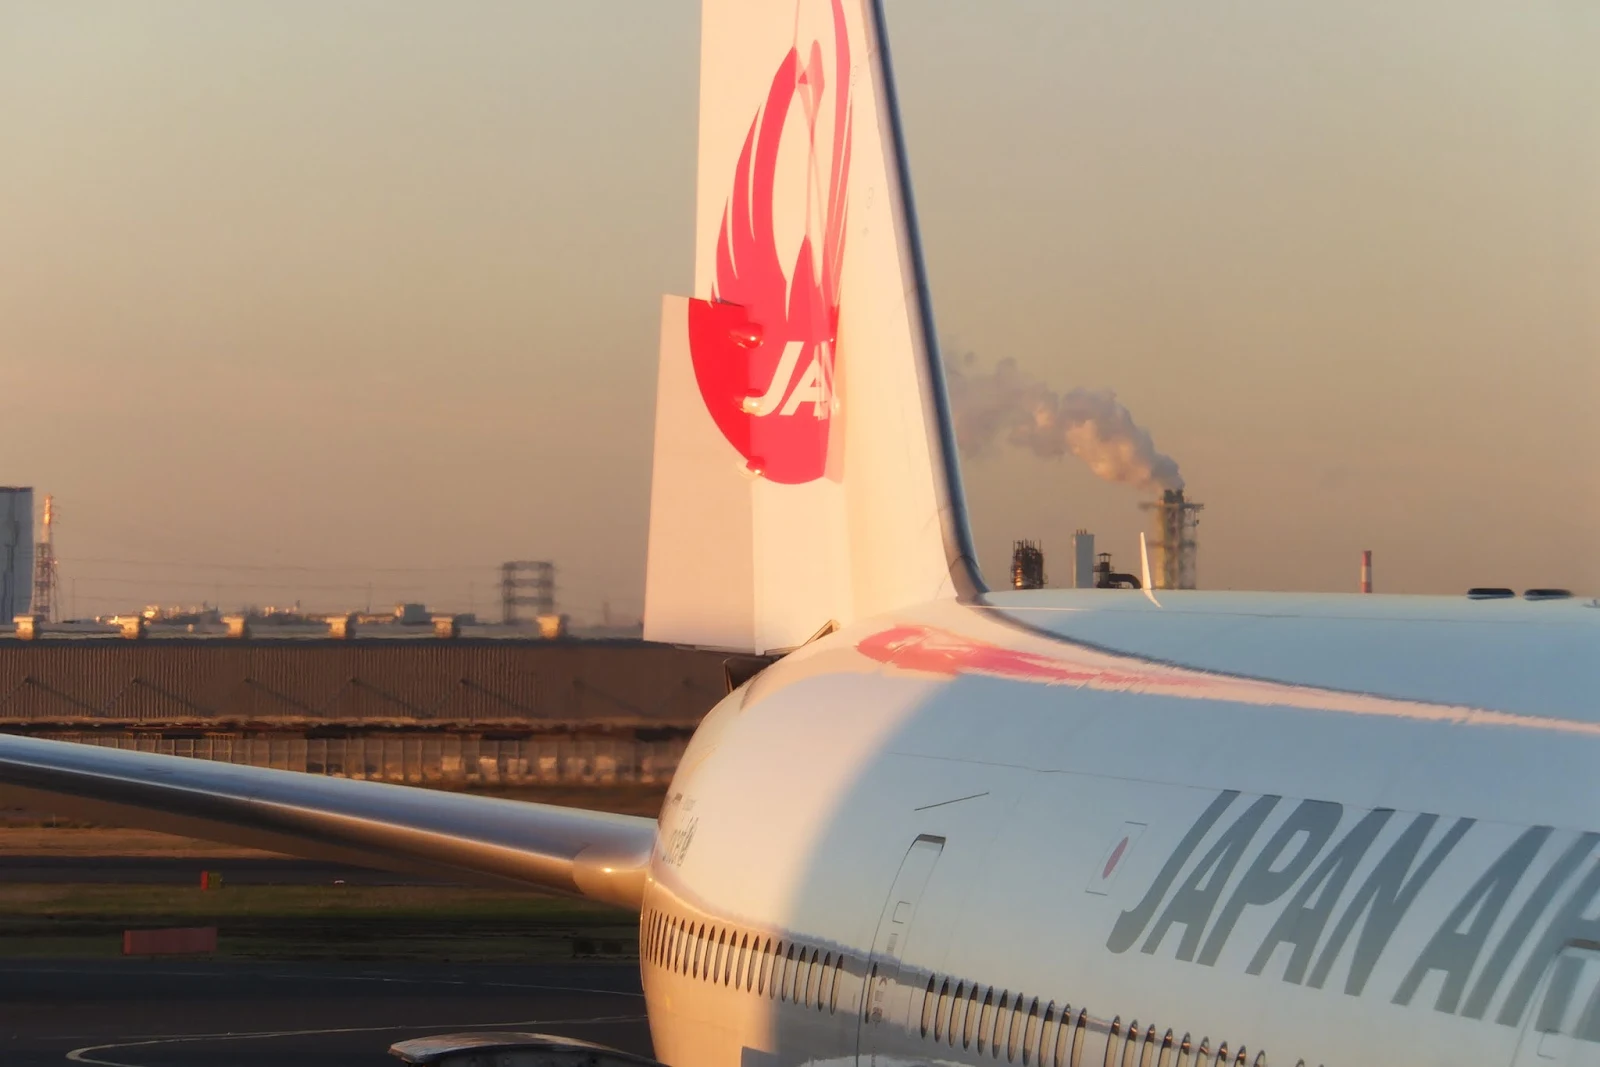 jal-777